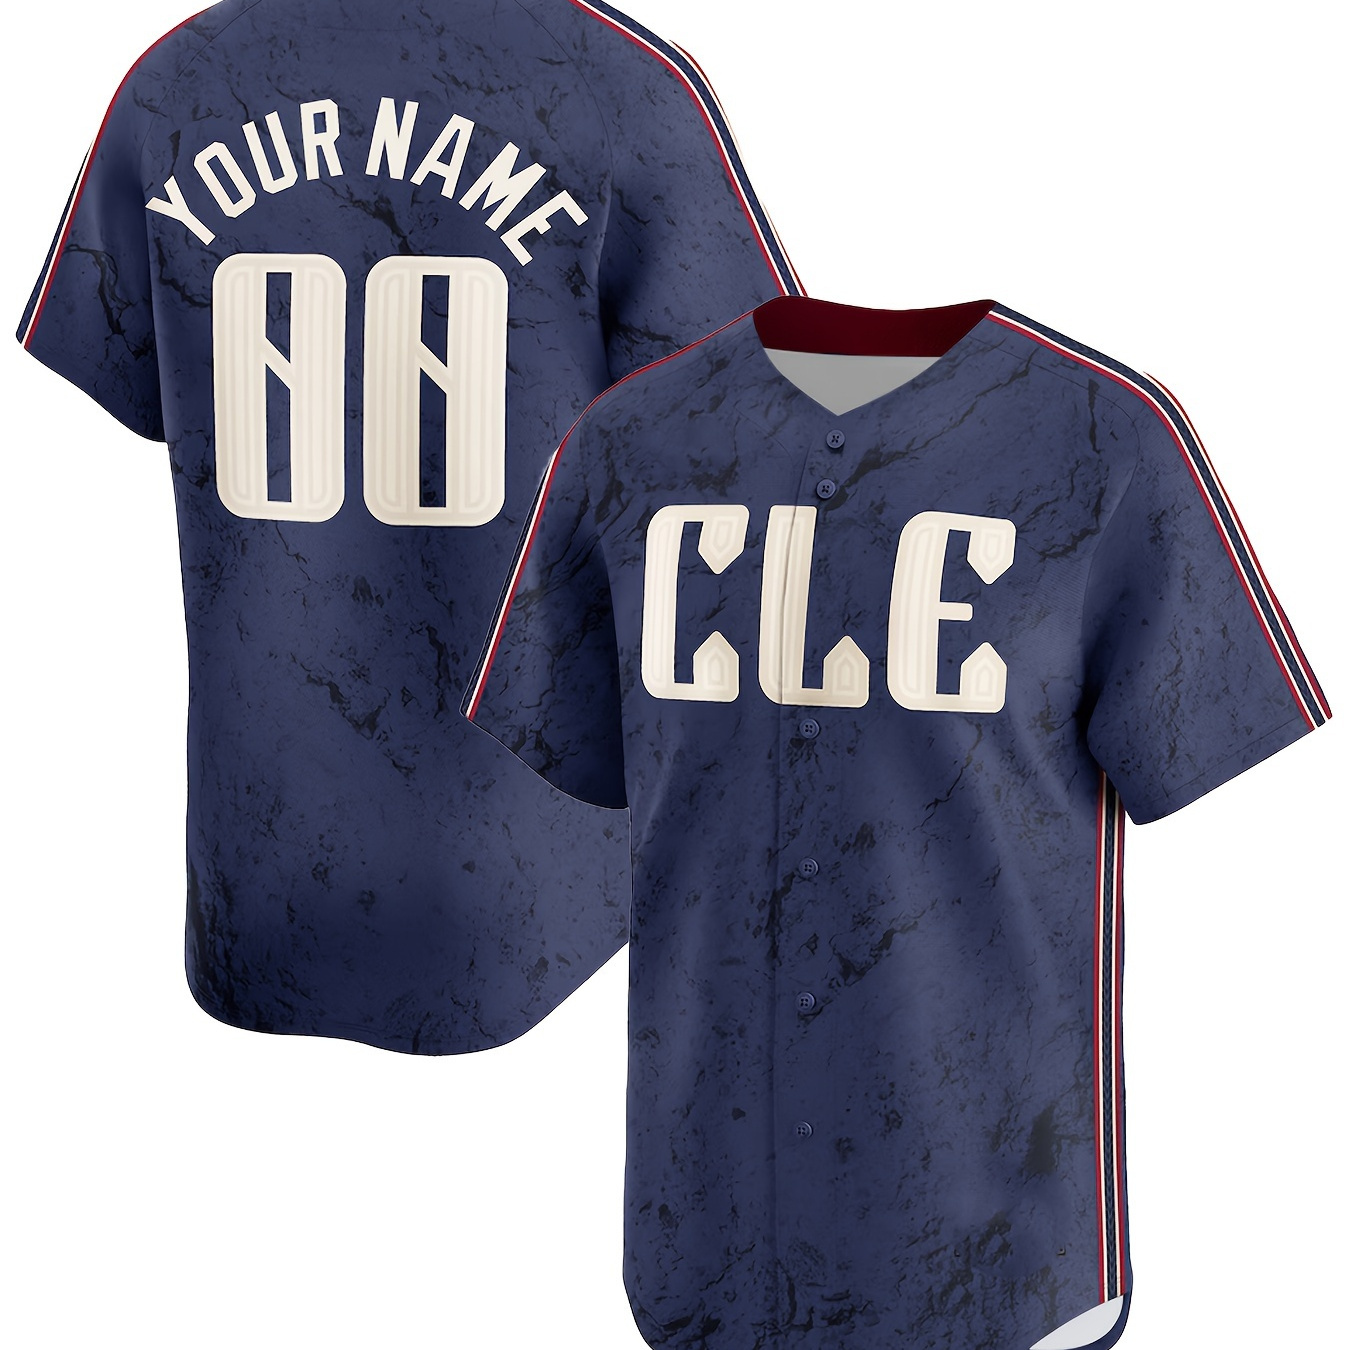 

Men's Customized Short Sleeve V-neck Baseball Jersey, Tailored To Your Preferences, Comfy Stylish For Training And Competition